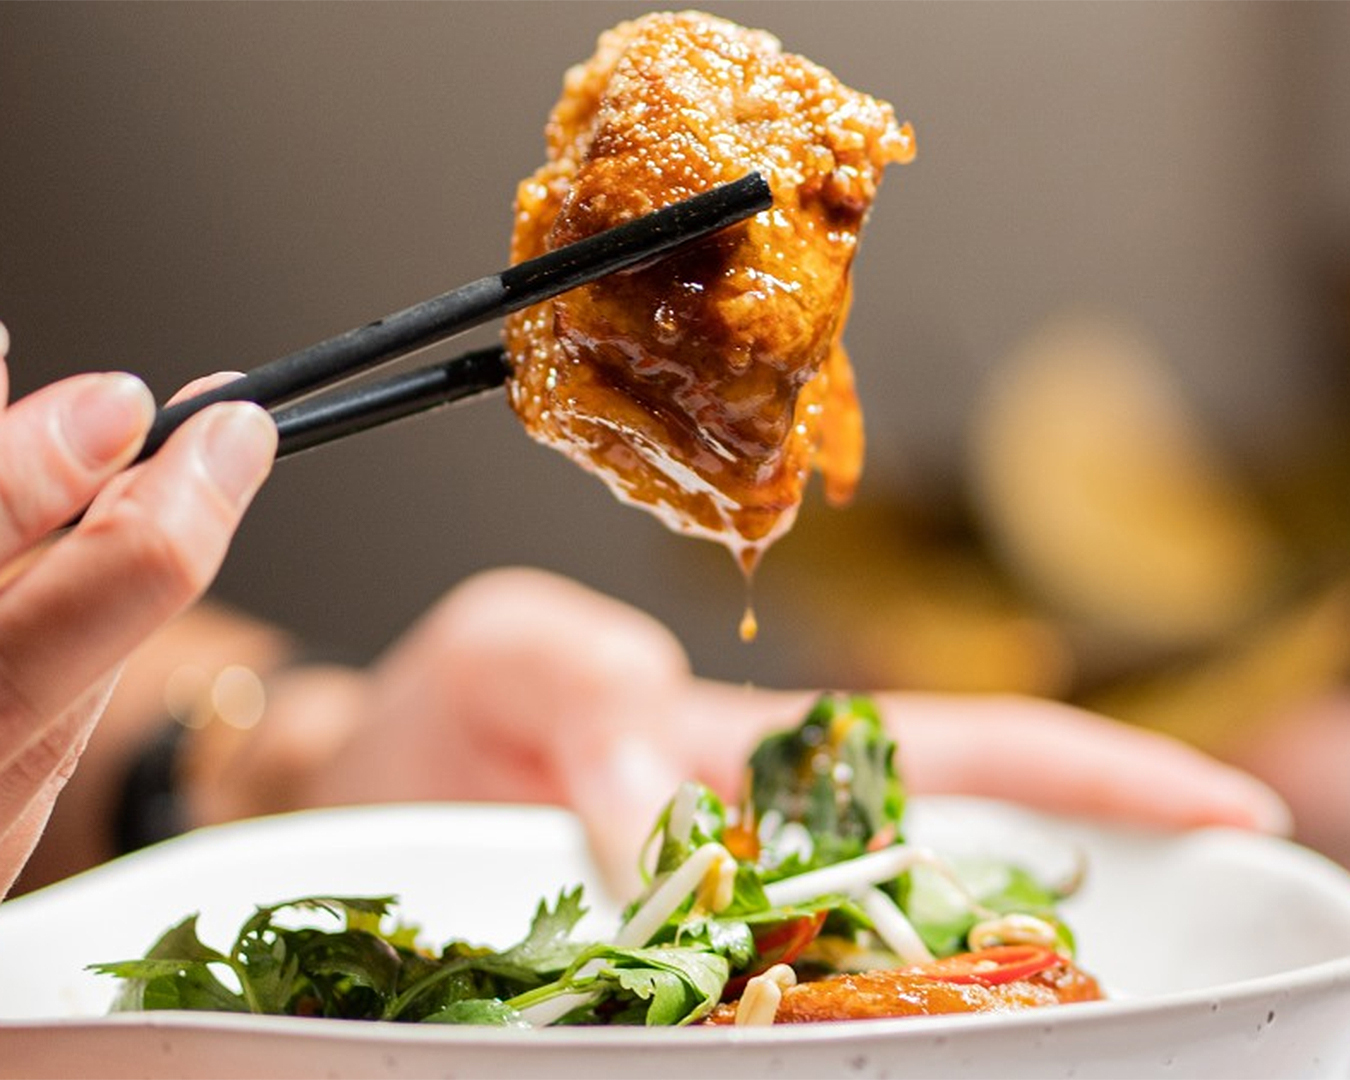 Caramelised pork belly? Paired with fragrant herb salad and crackling dumplings.